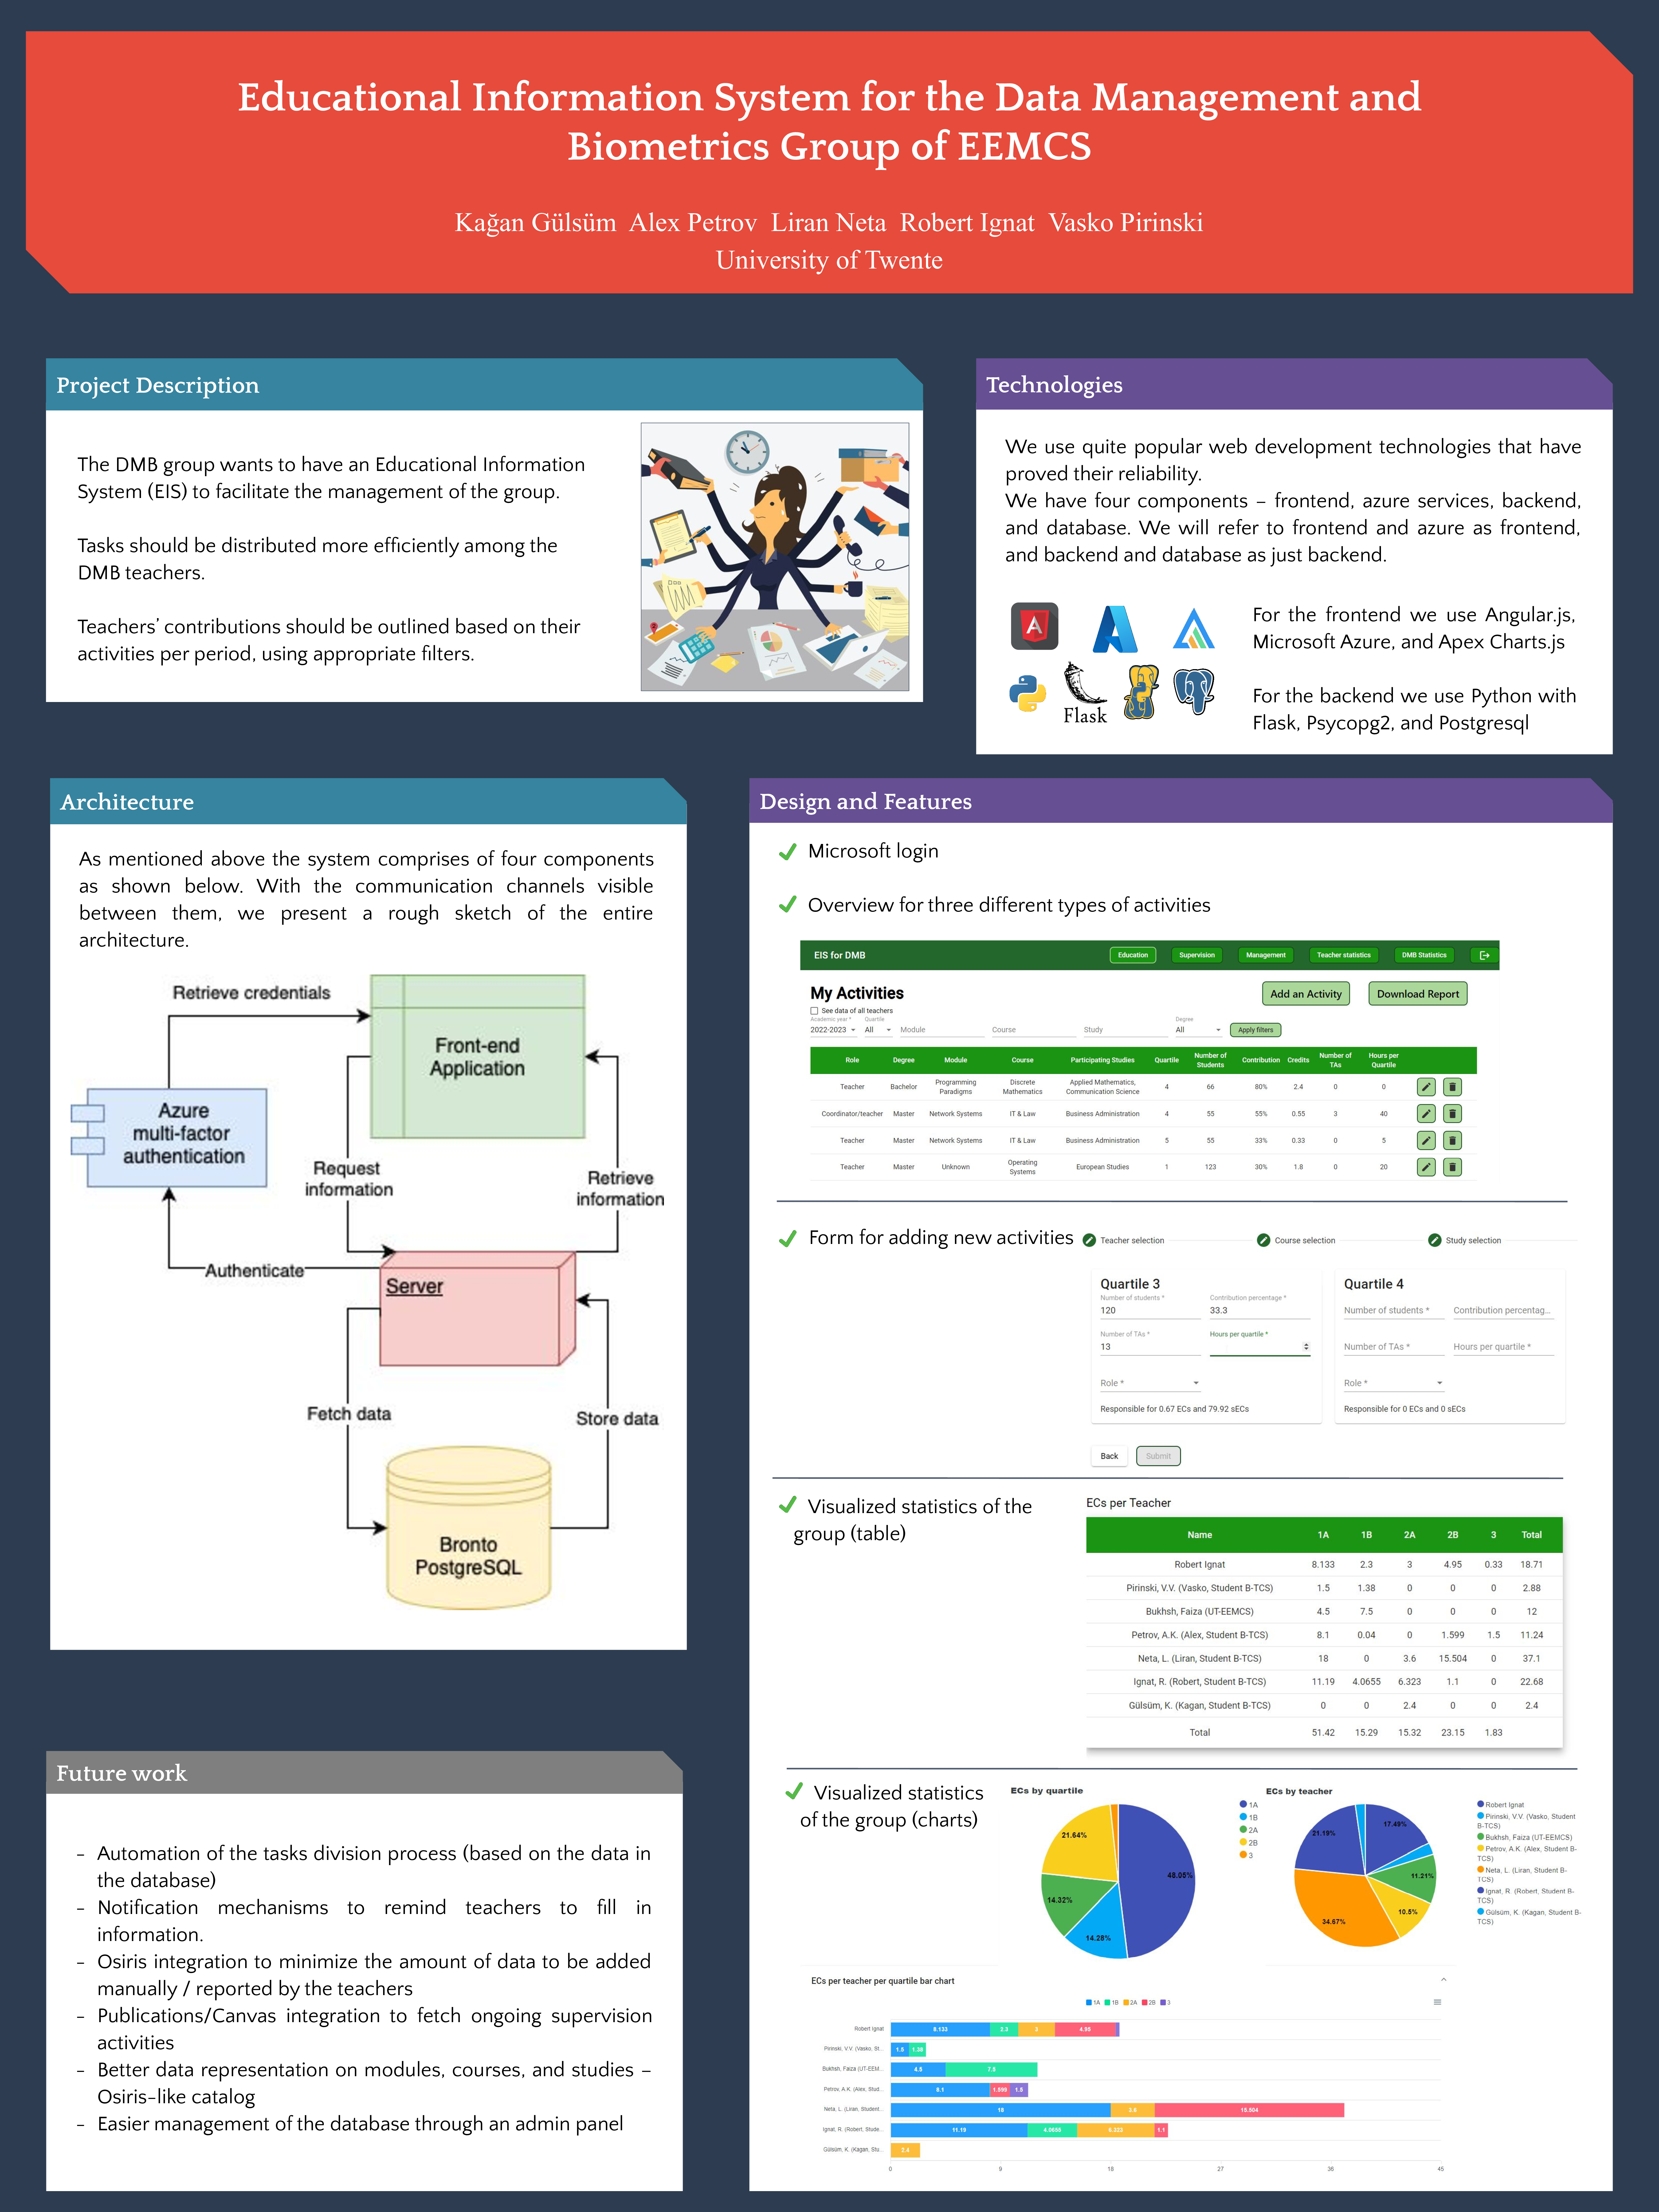 Poster, Educational Information System for the DMB Group